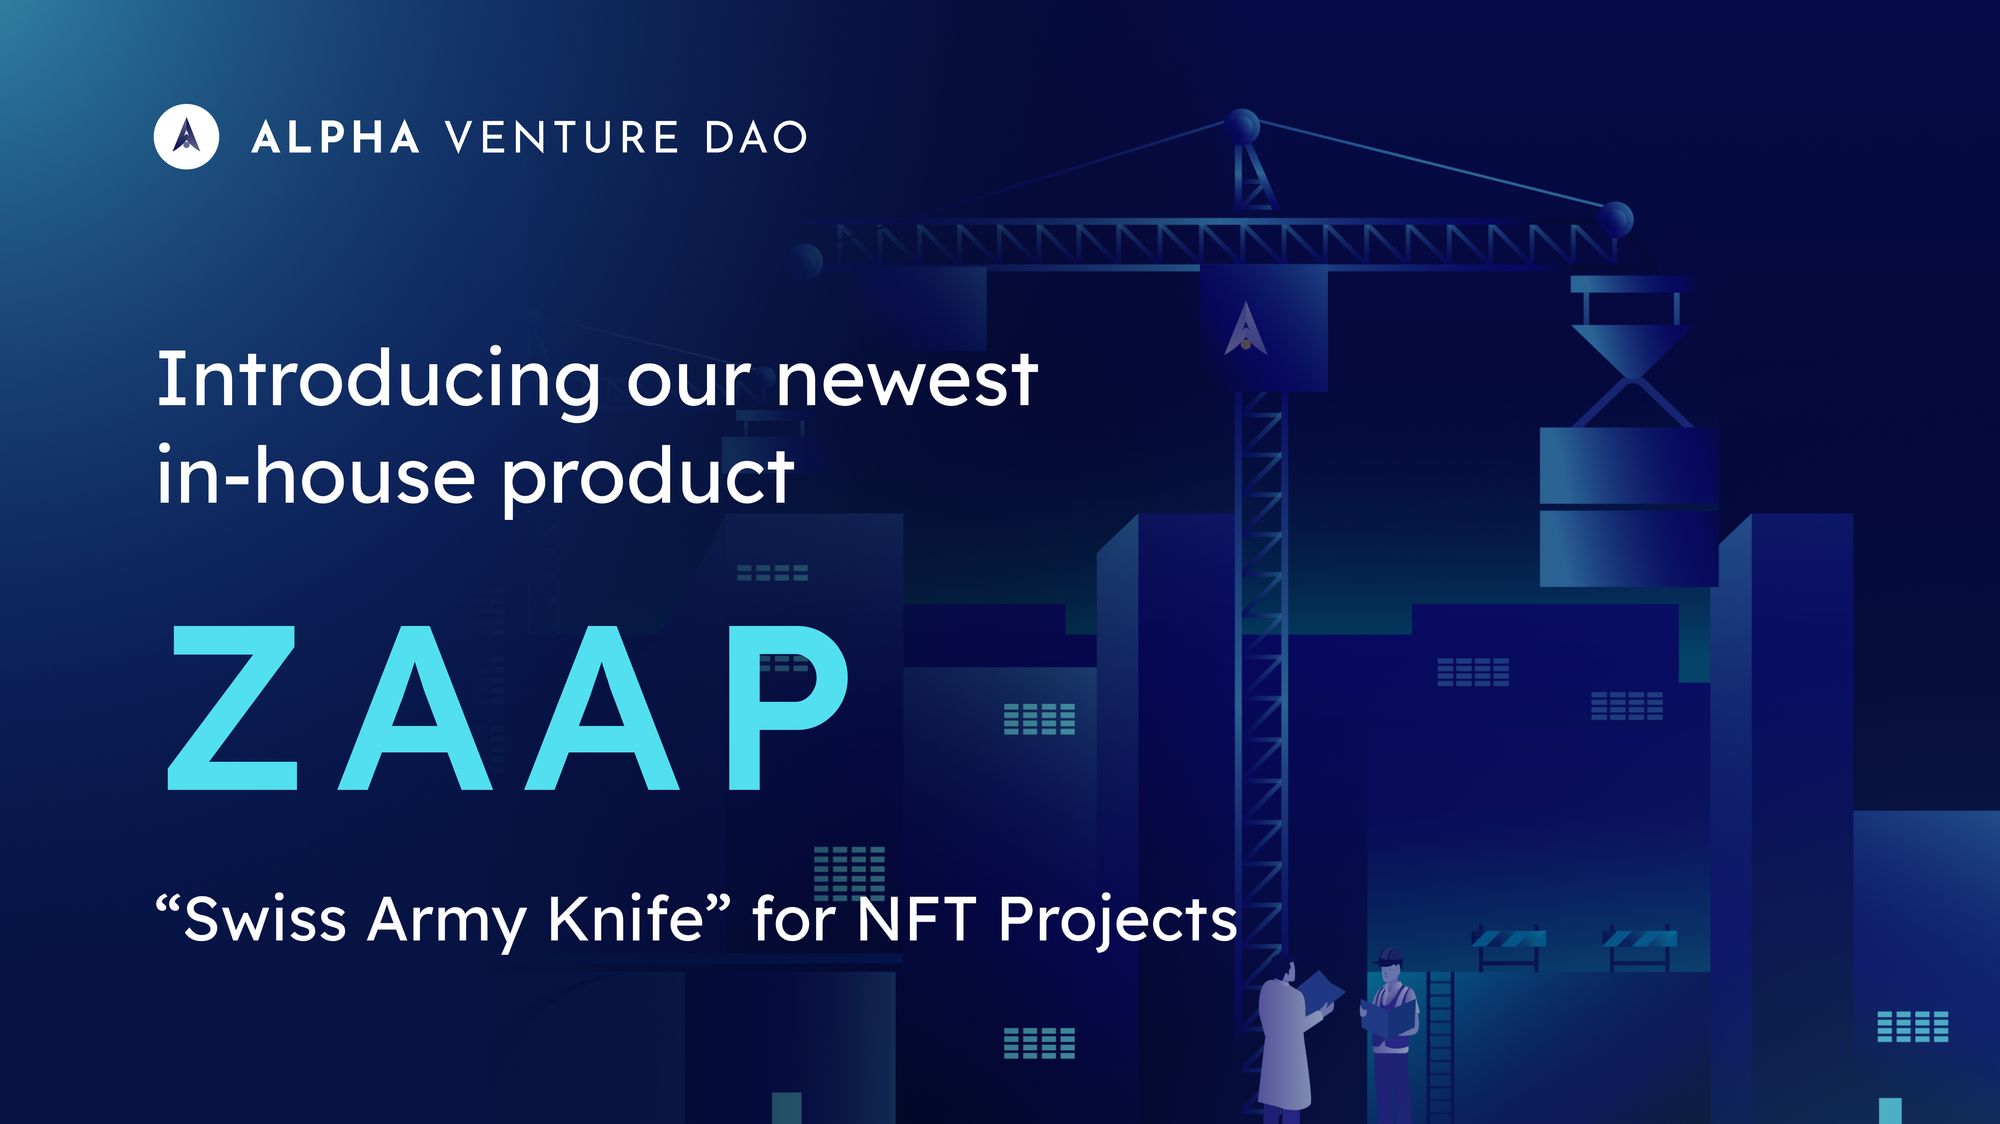 Introducing Our Newest In-house Product - ZAAP, “Swiss Army Knife” for NFT Projects